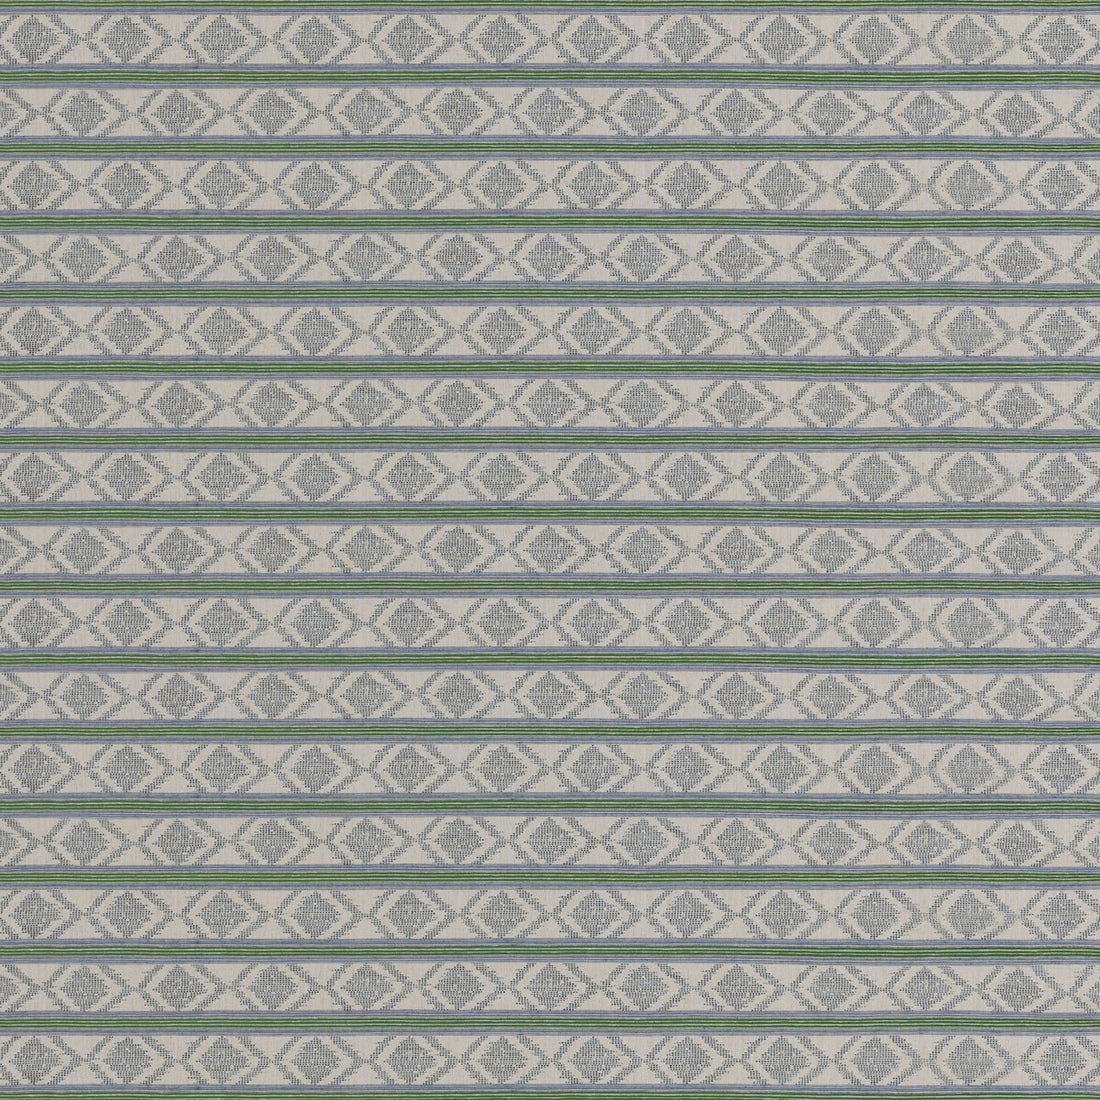 Burford Stripe fabric in blue/green color - pattern BF11034.7.0 - by G P &amp; J Baker in the Burford Weaves collection